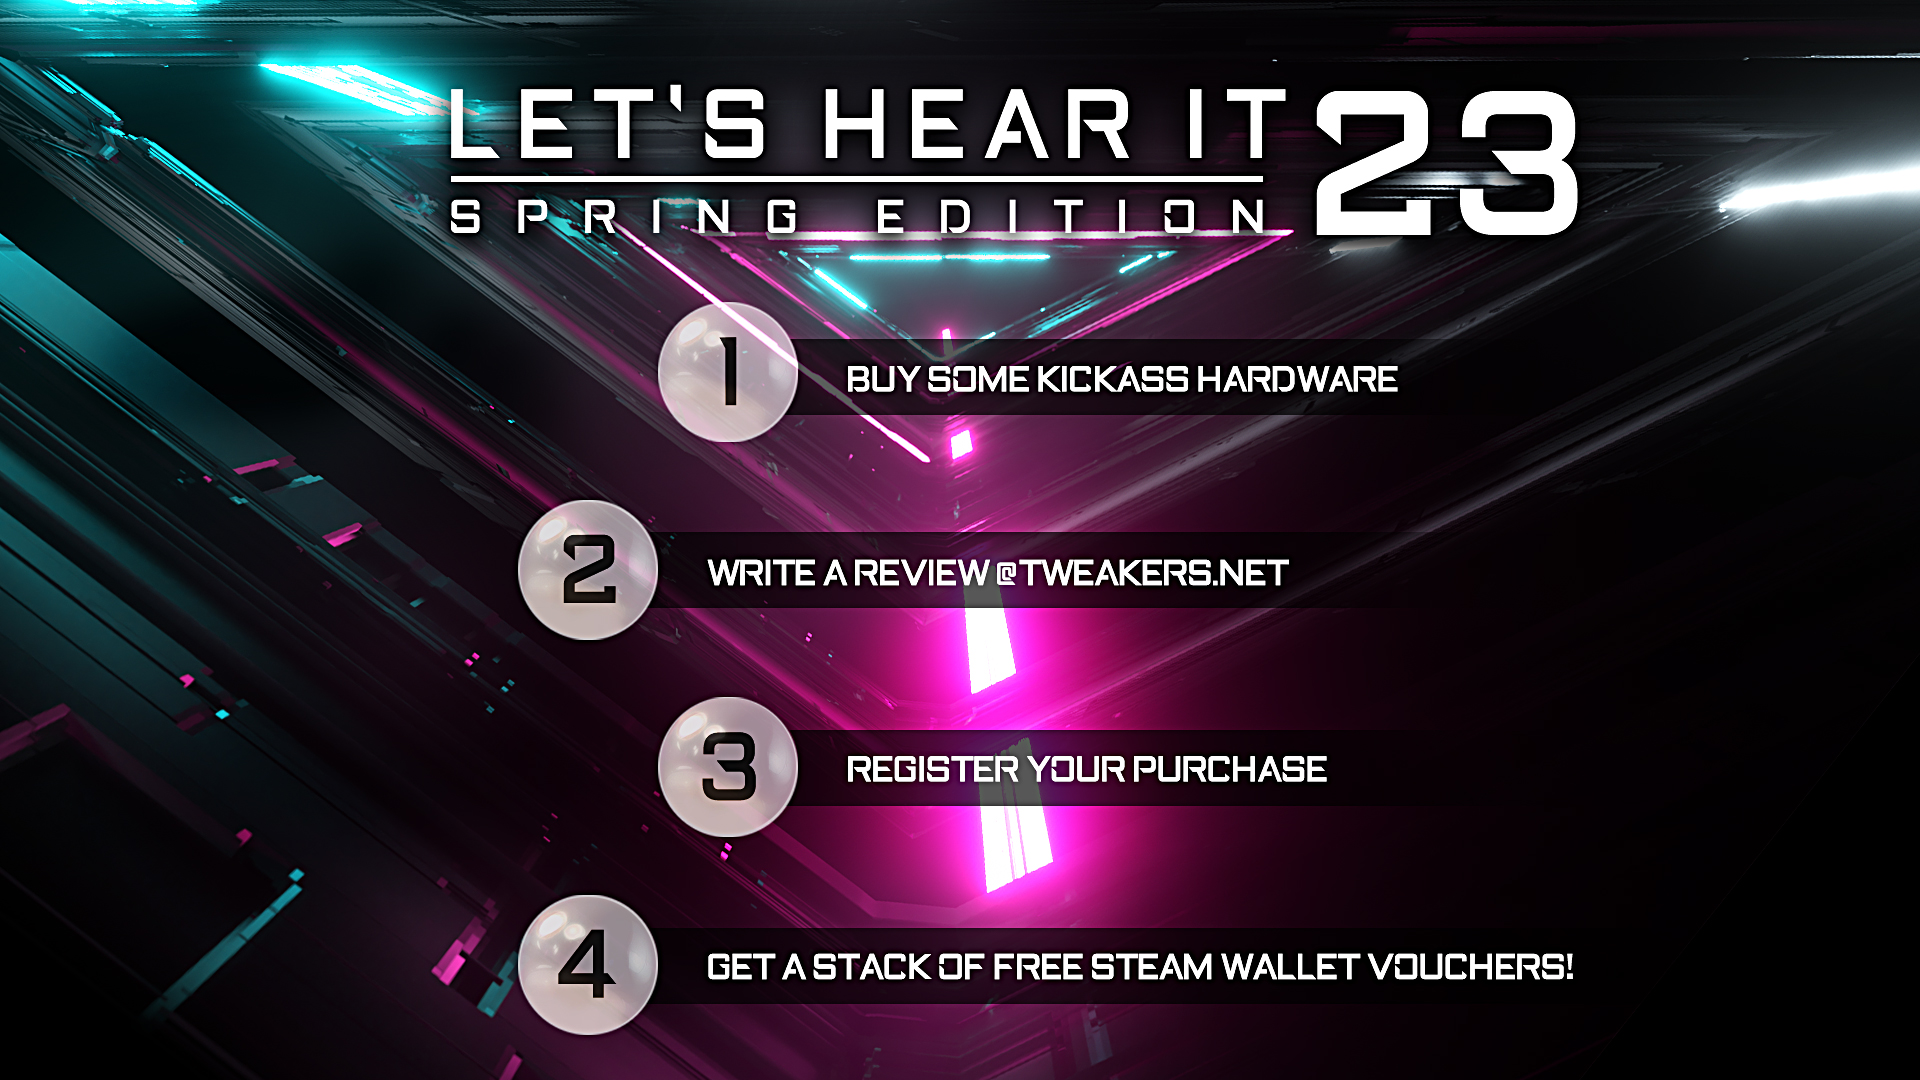 Let's hear it 23 - Spring Edition